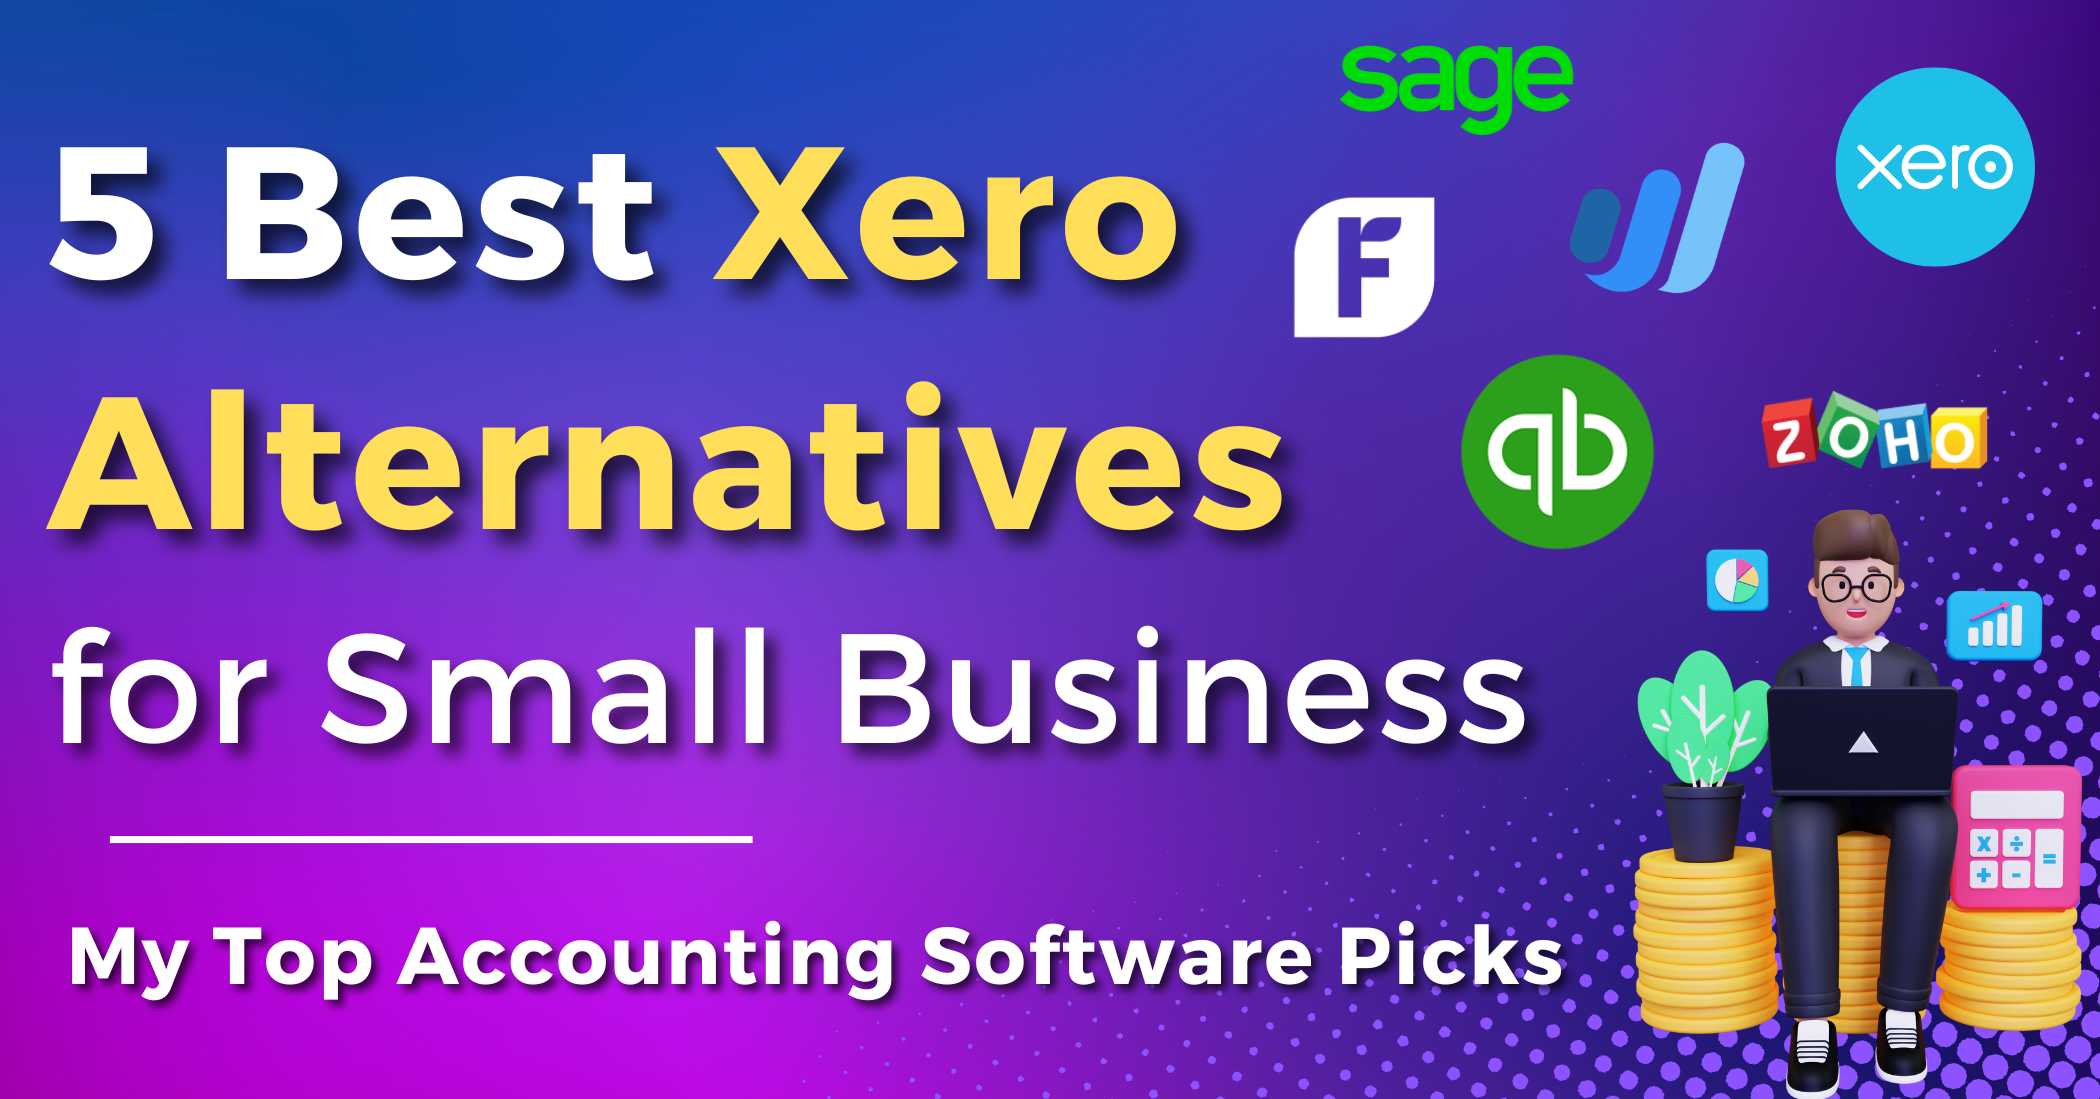 5 Best Xero Alternatives: Accounting Software for Small Business